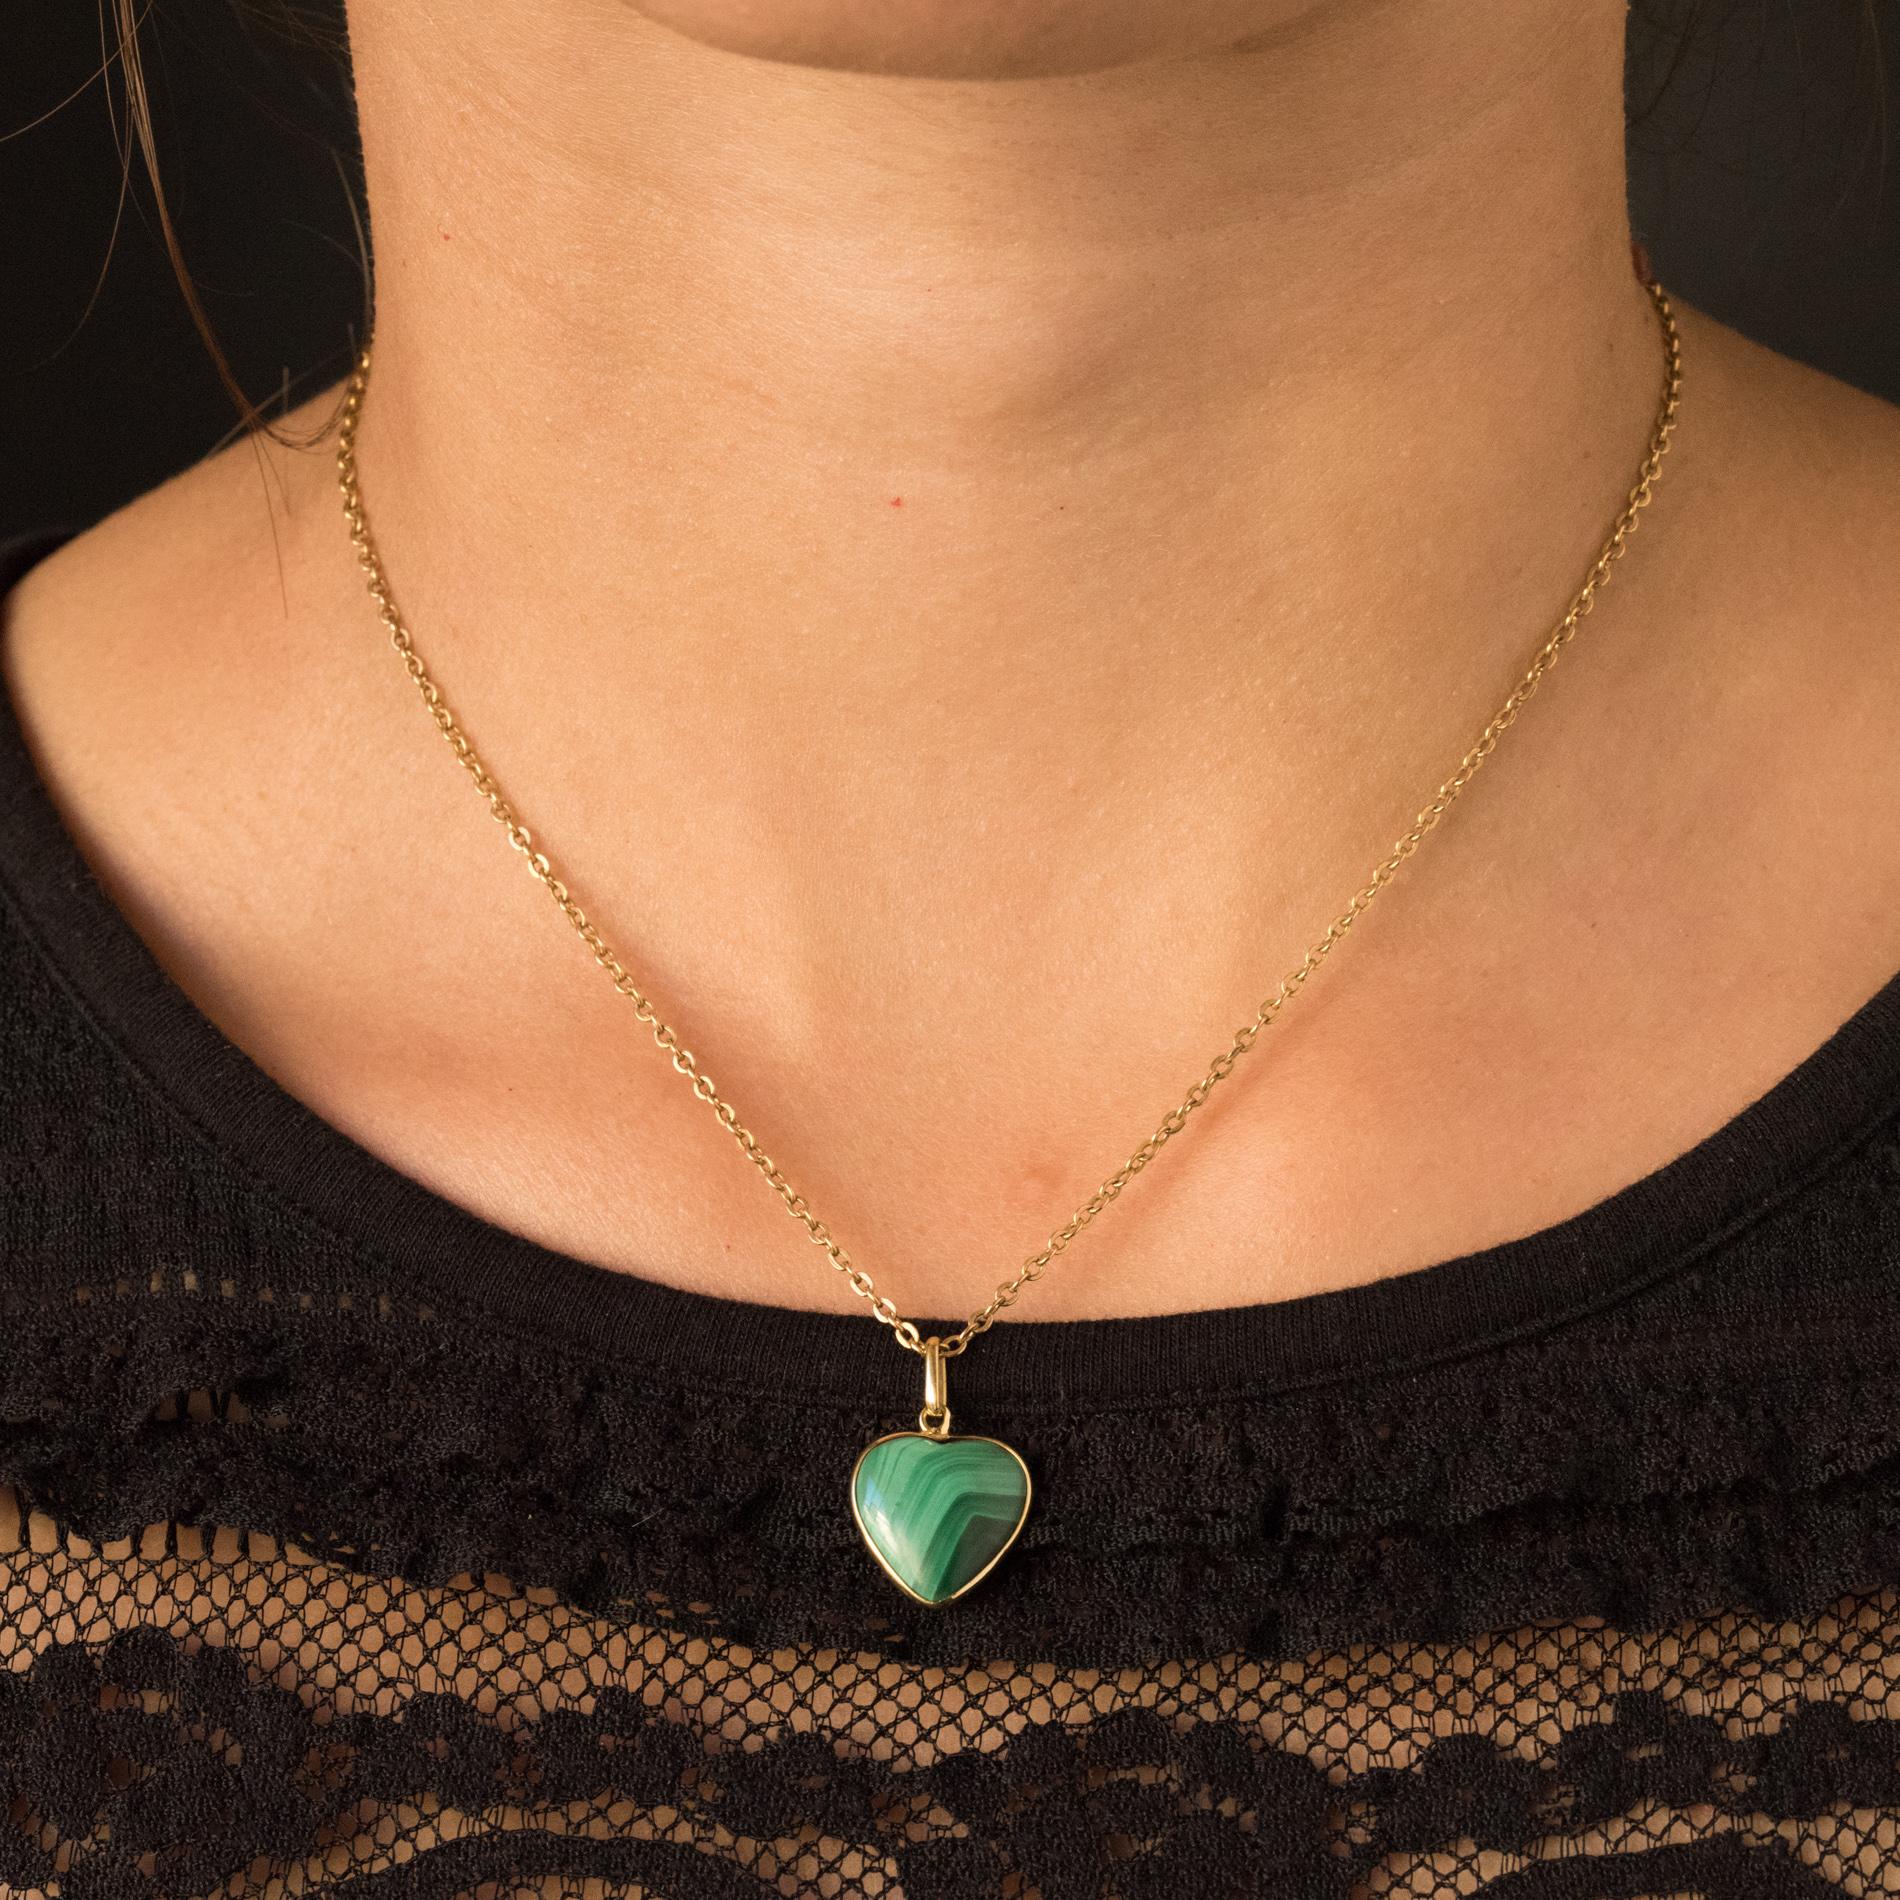 Pendant in 18 karats yellow gold.
It is formed of a malachite heart within a yellow gold closed set.
Height: 2 cm, width: 4.5 mm, thickness: 5 mm.
Total weight of the jewel: 2.2 g approximately.
Sold alone without the presentation chain.
Antique